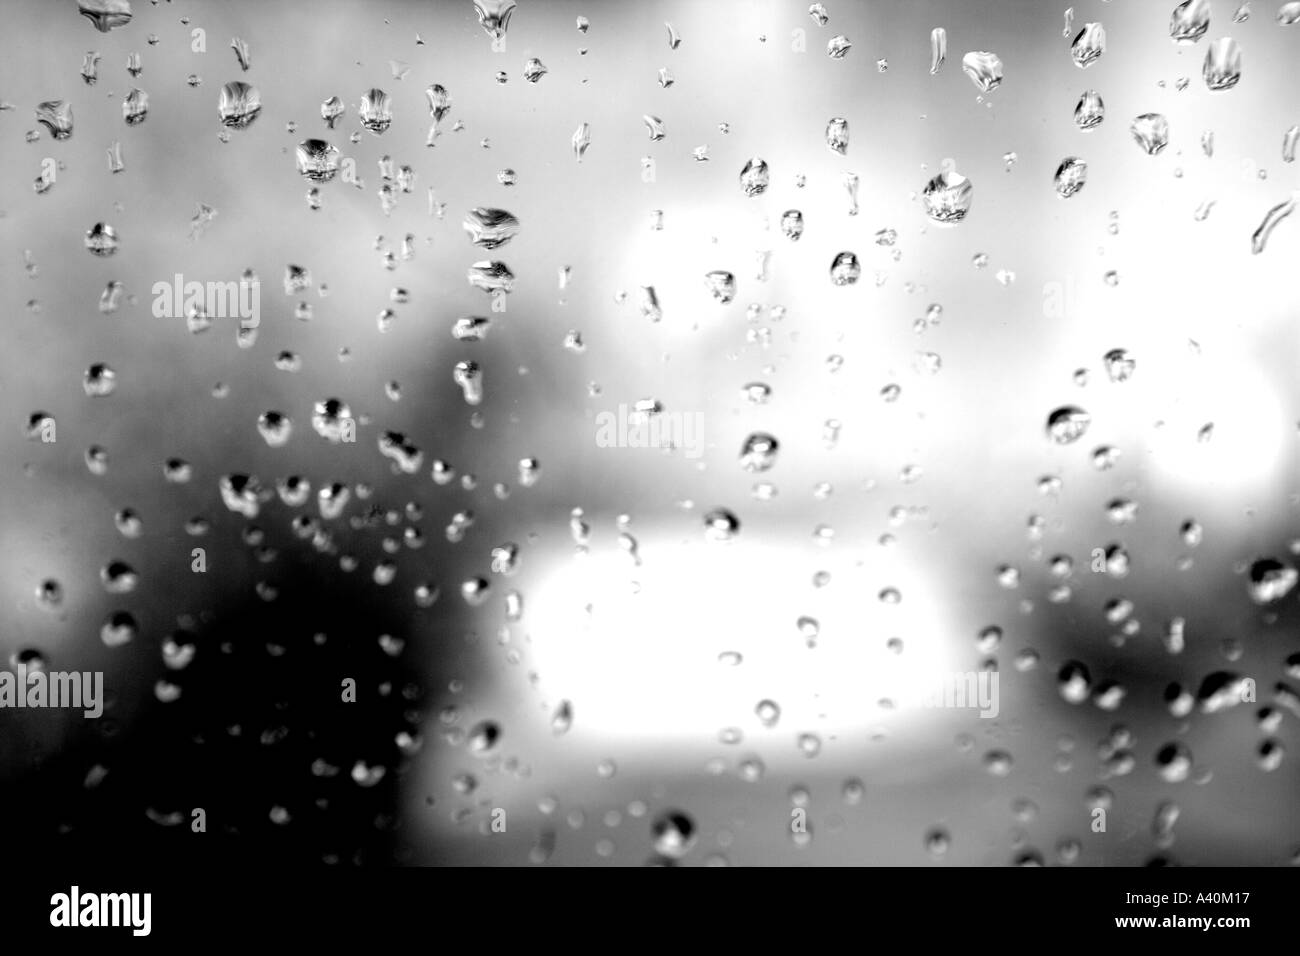 LOOKING OUT TO A GARDEN AS THE SUN APPEARS AFTER THE RAIN WITH RAINDROPS ON WINDOW Stock Photo